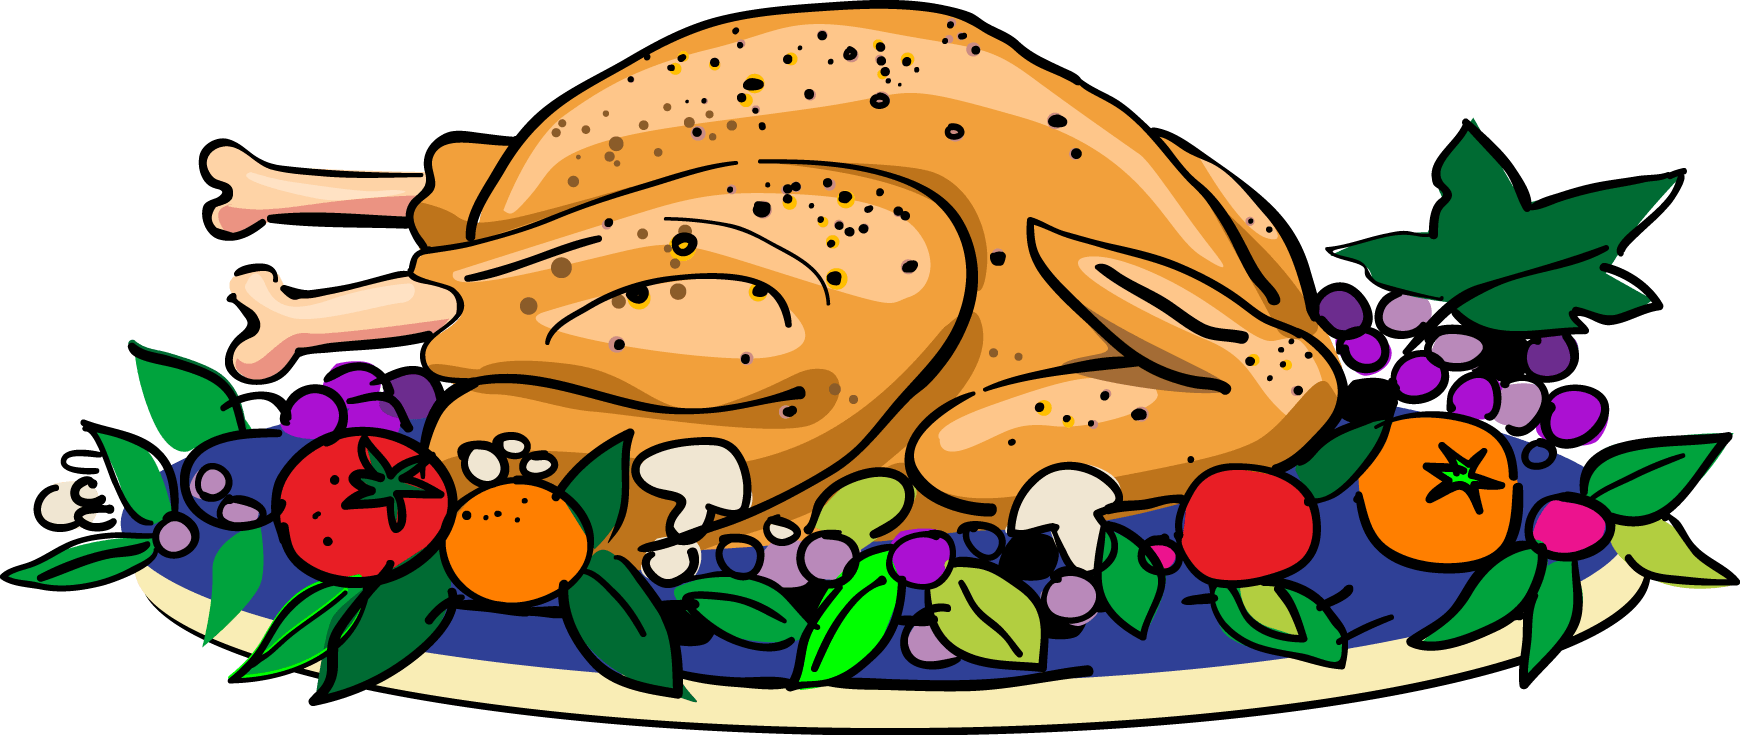 Roasted Turkeywith Garnish Clipart PNG image